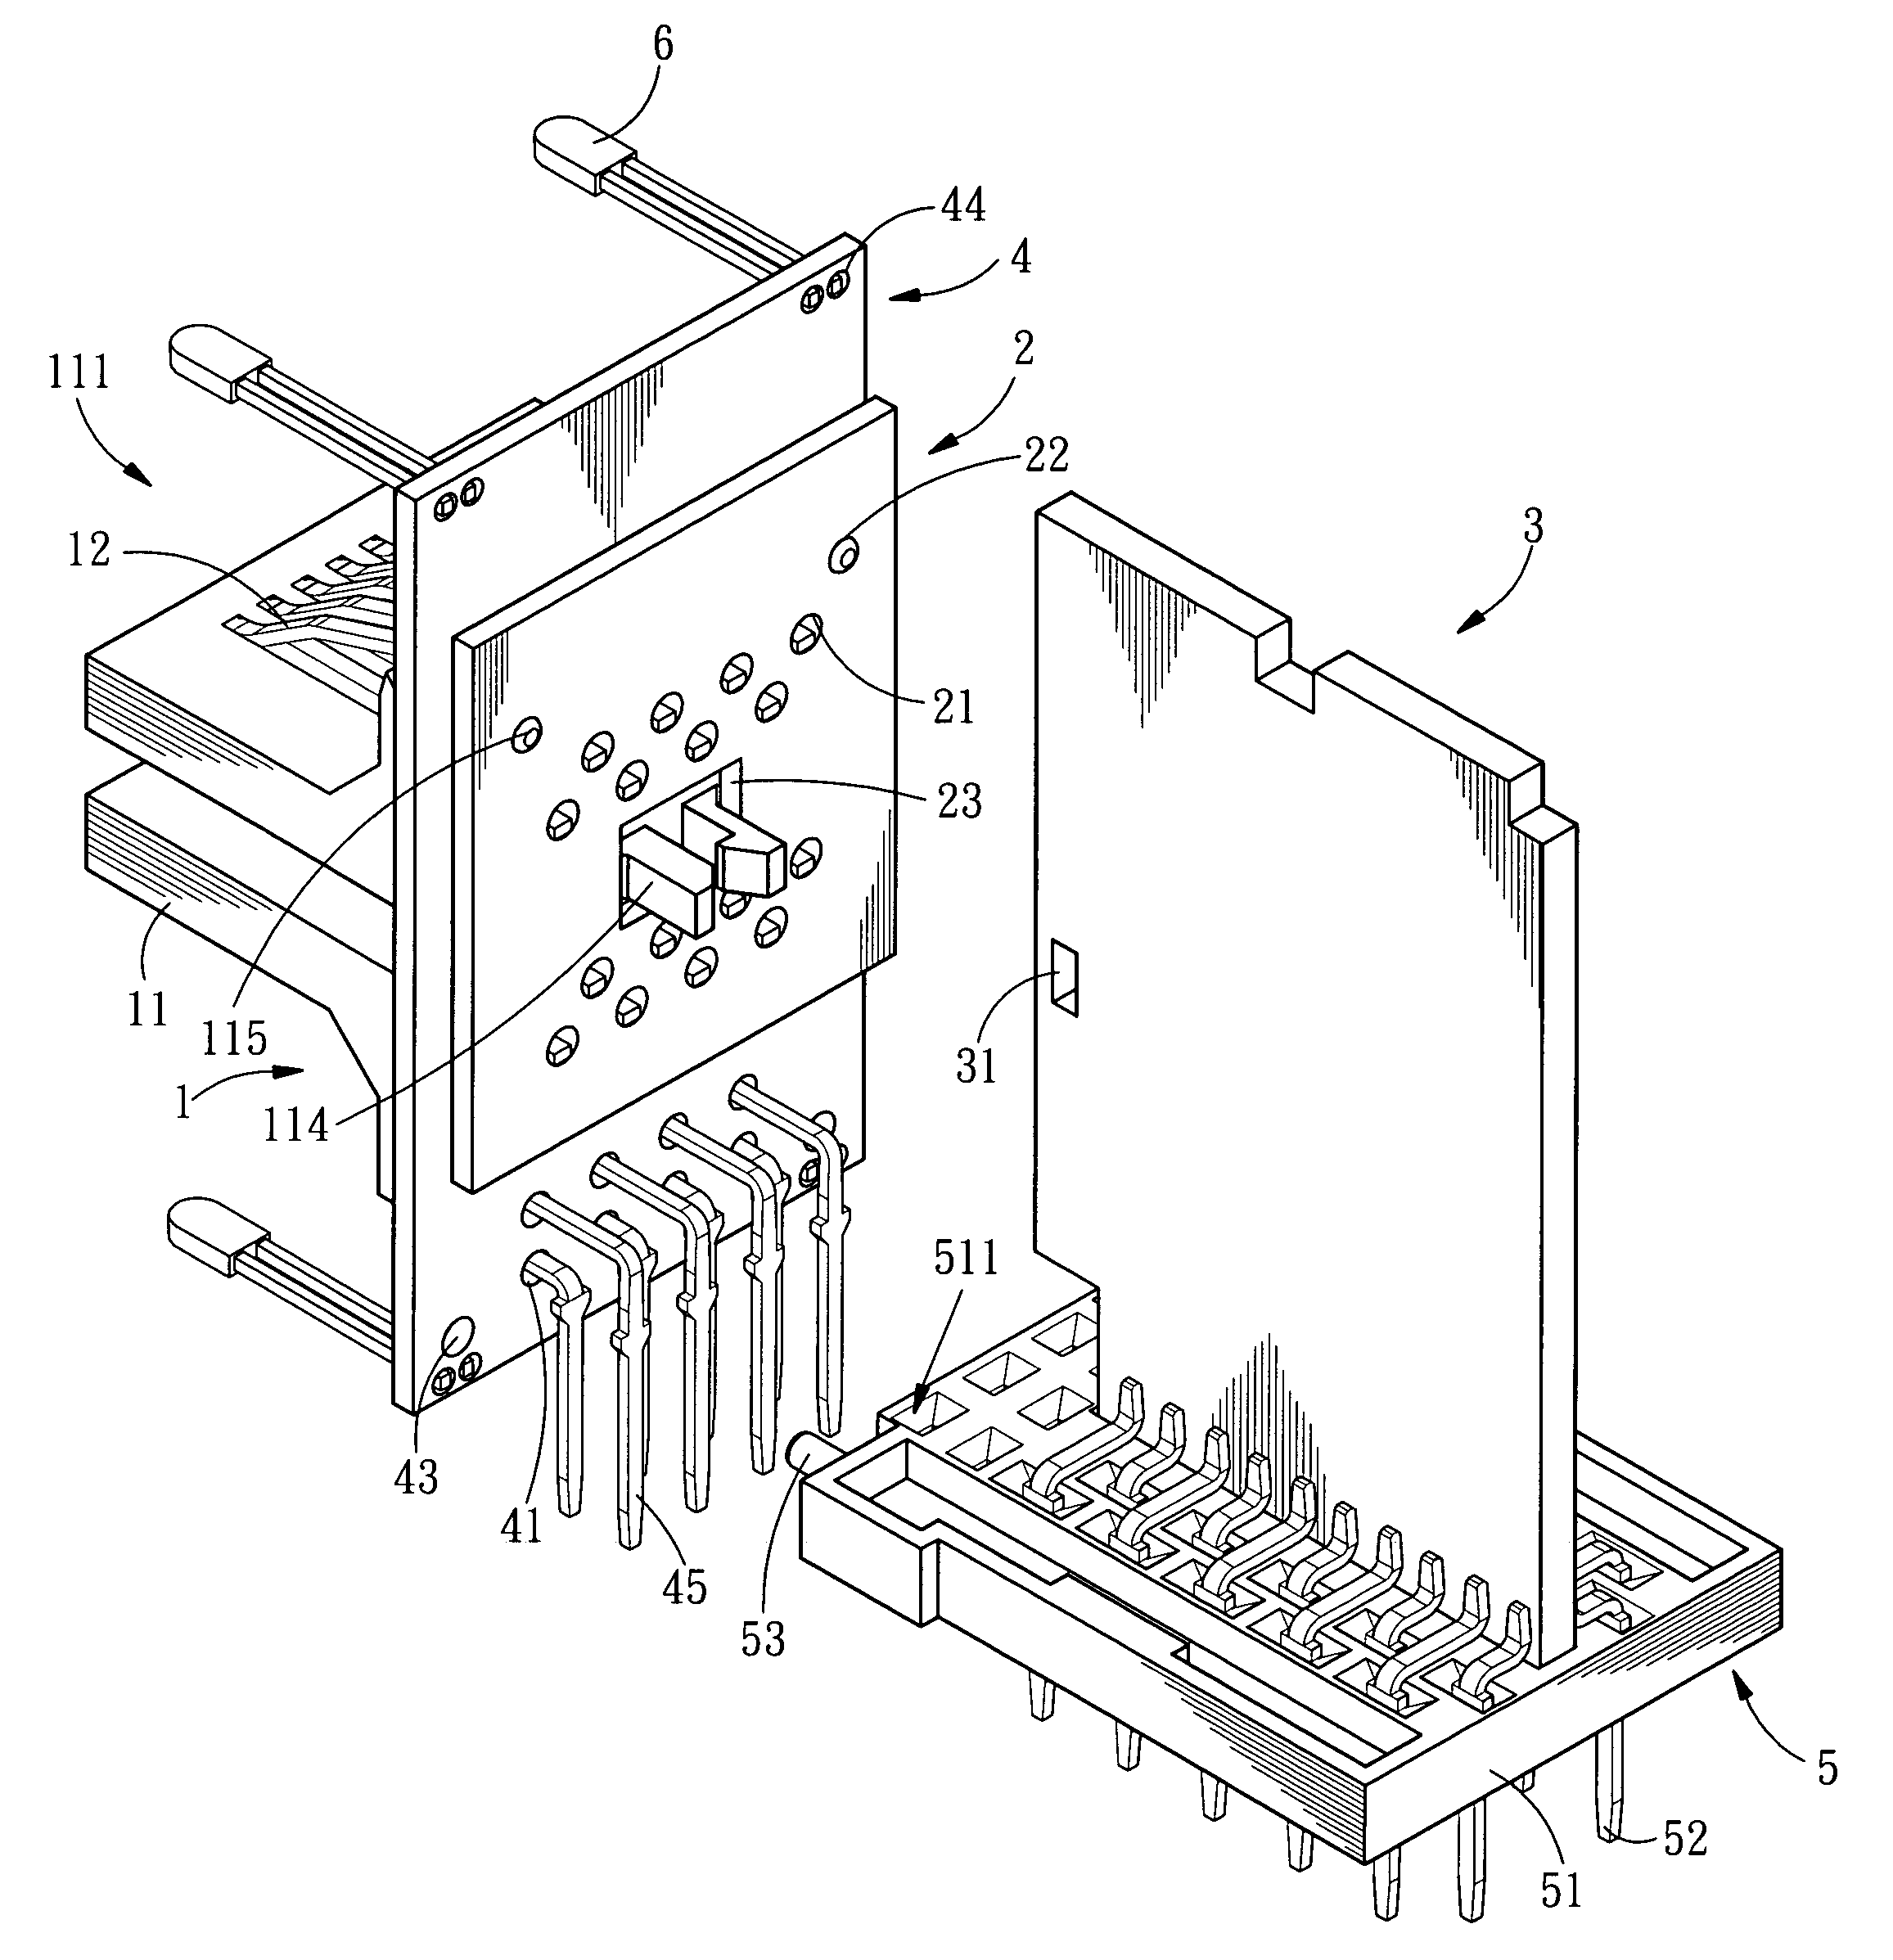 Structure of connector for reducing electro-magnetic wave interference